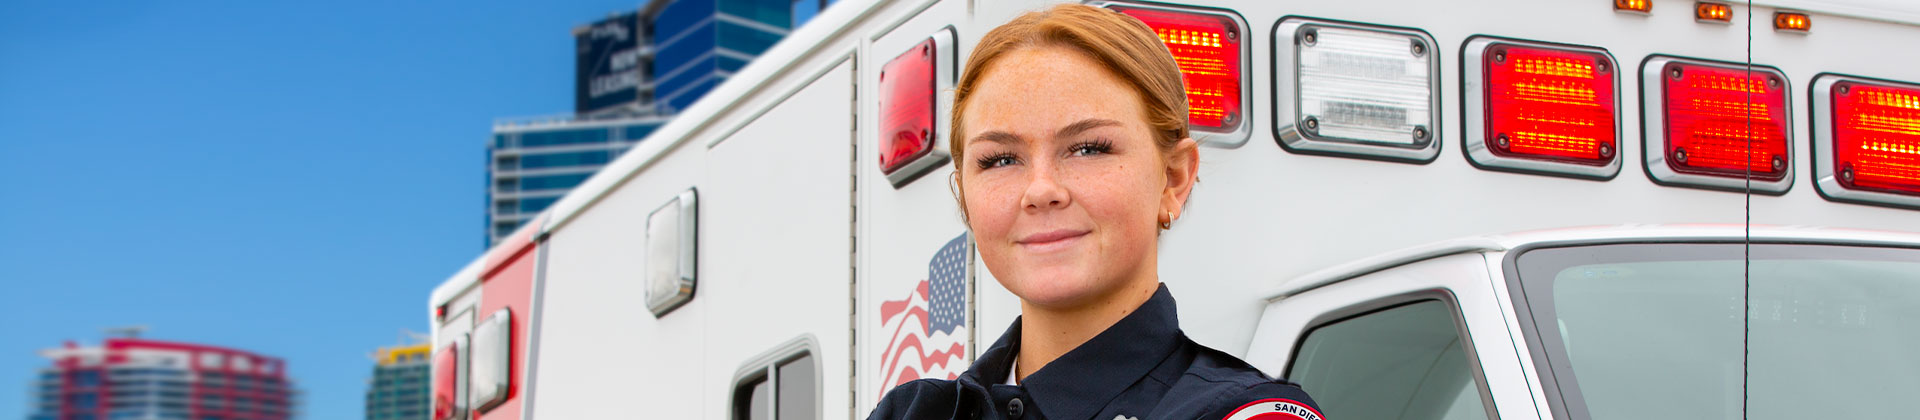 A woman with auburn hair pulled back stands in front of an ambulance 